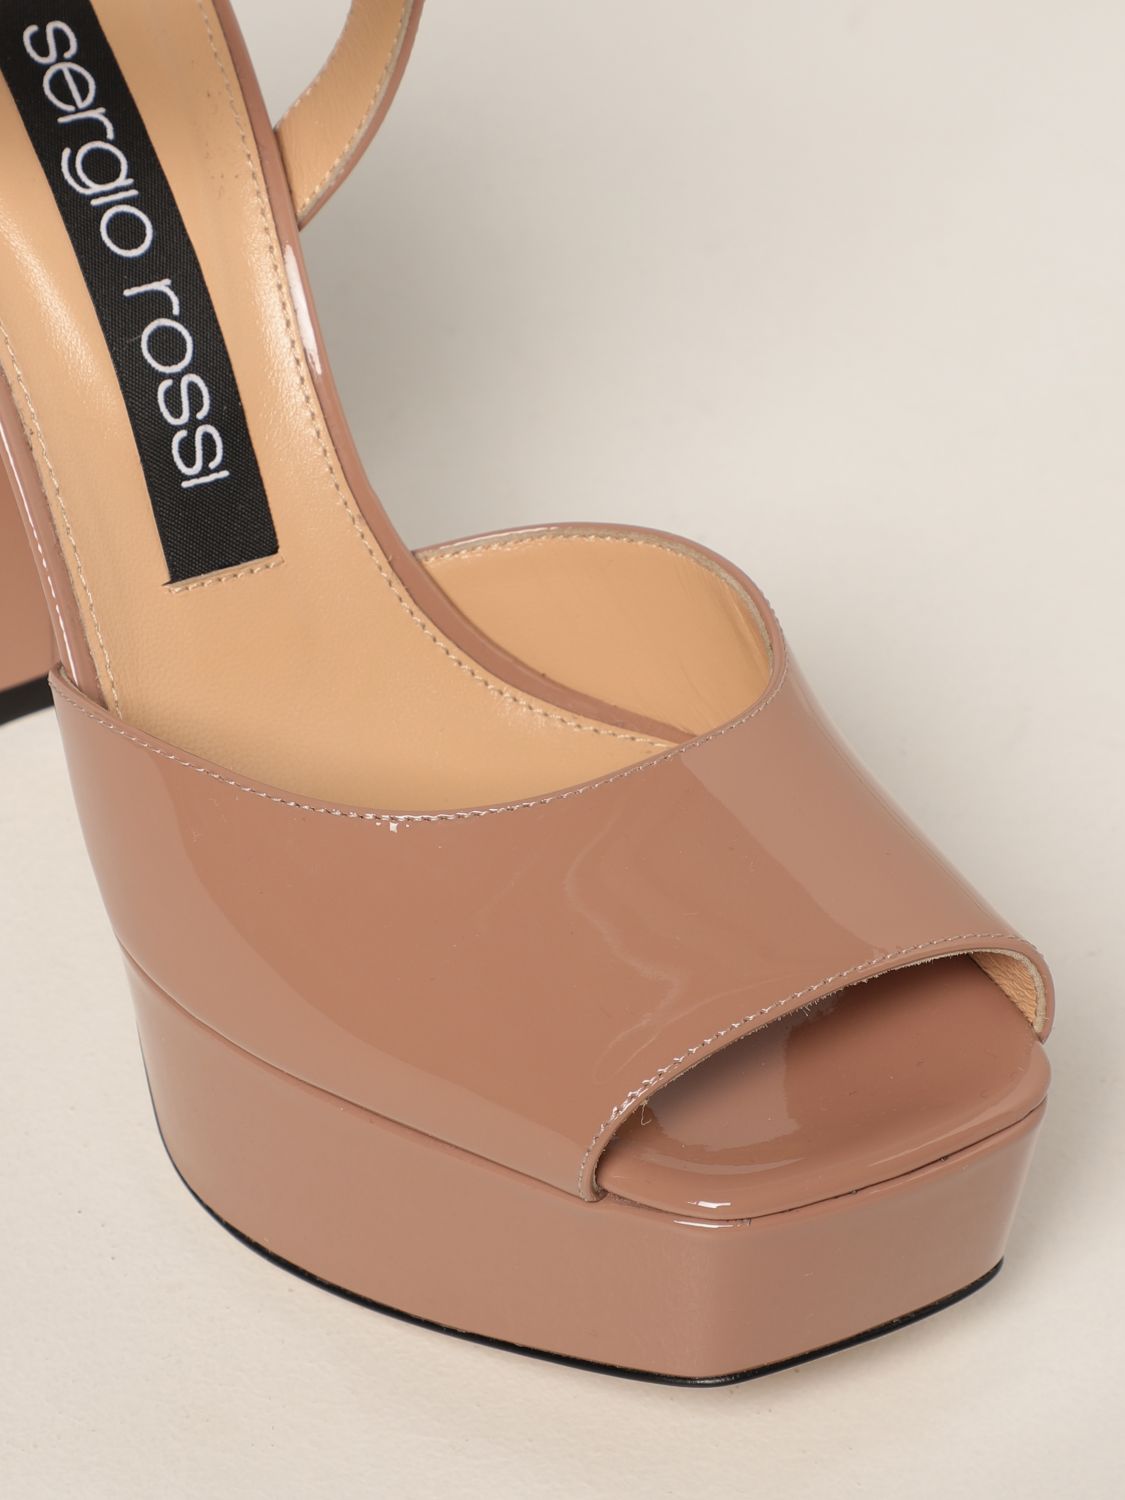 Heeled sandals Sergio Rossi: Sergio Rossi patent leather sandal blush pink 4